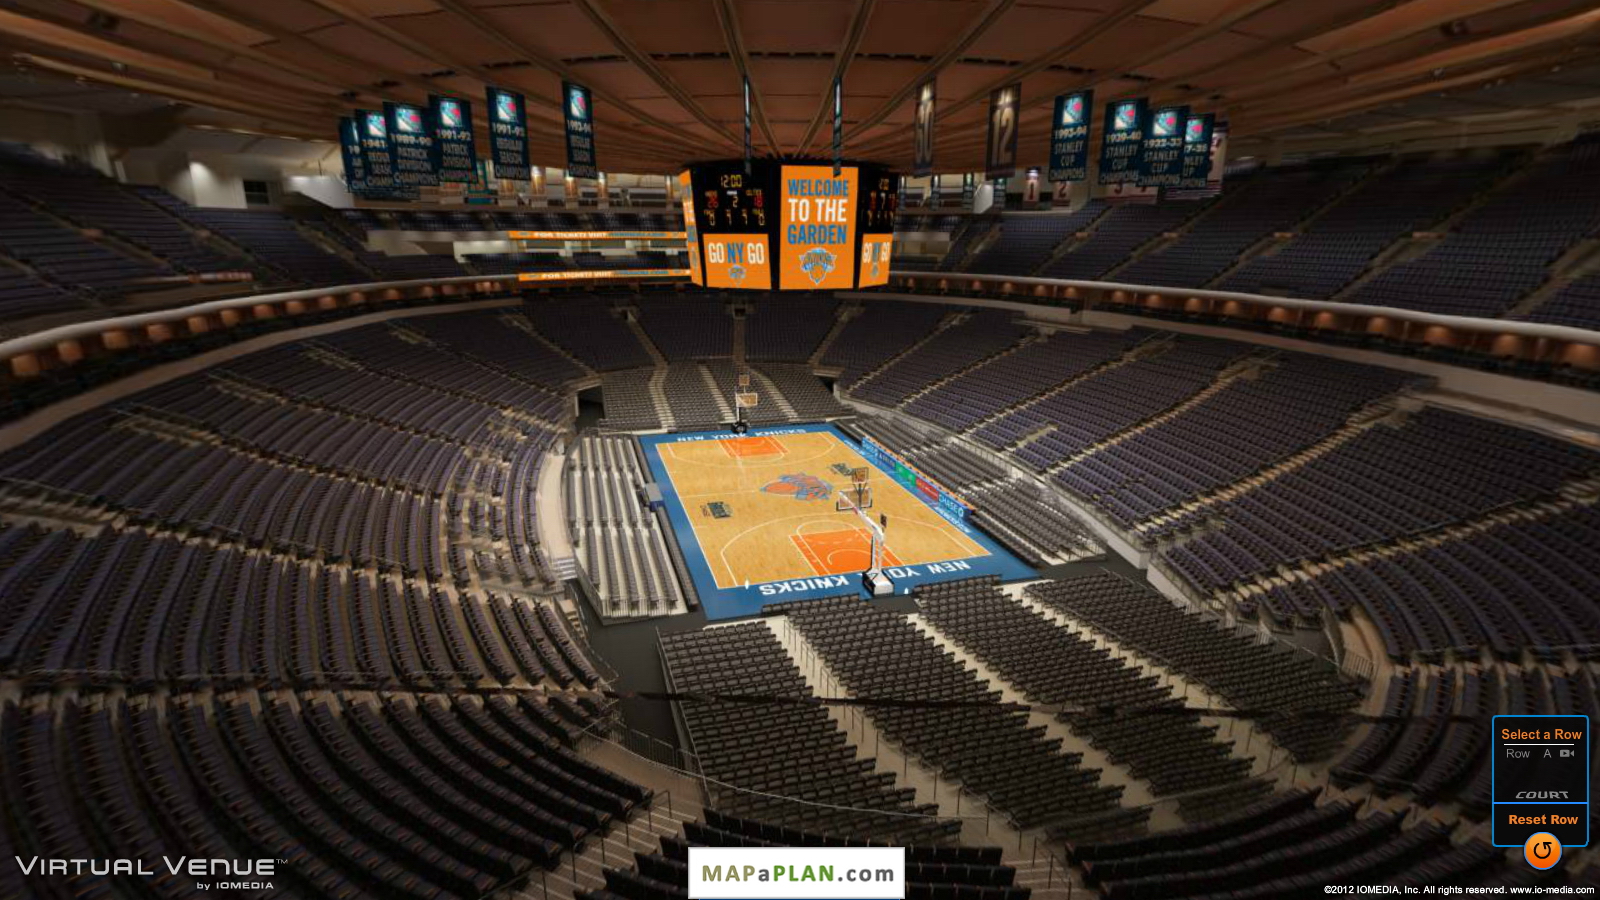 Madison square garden seating chart View section suite 904